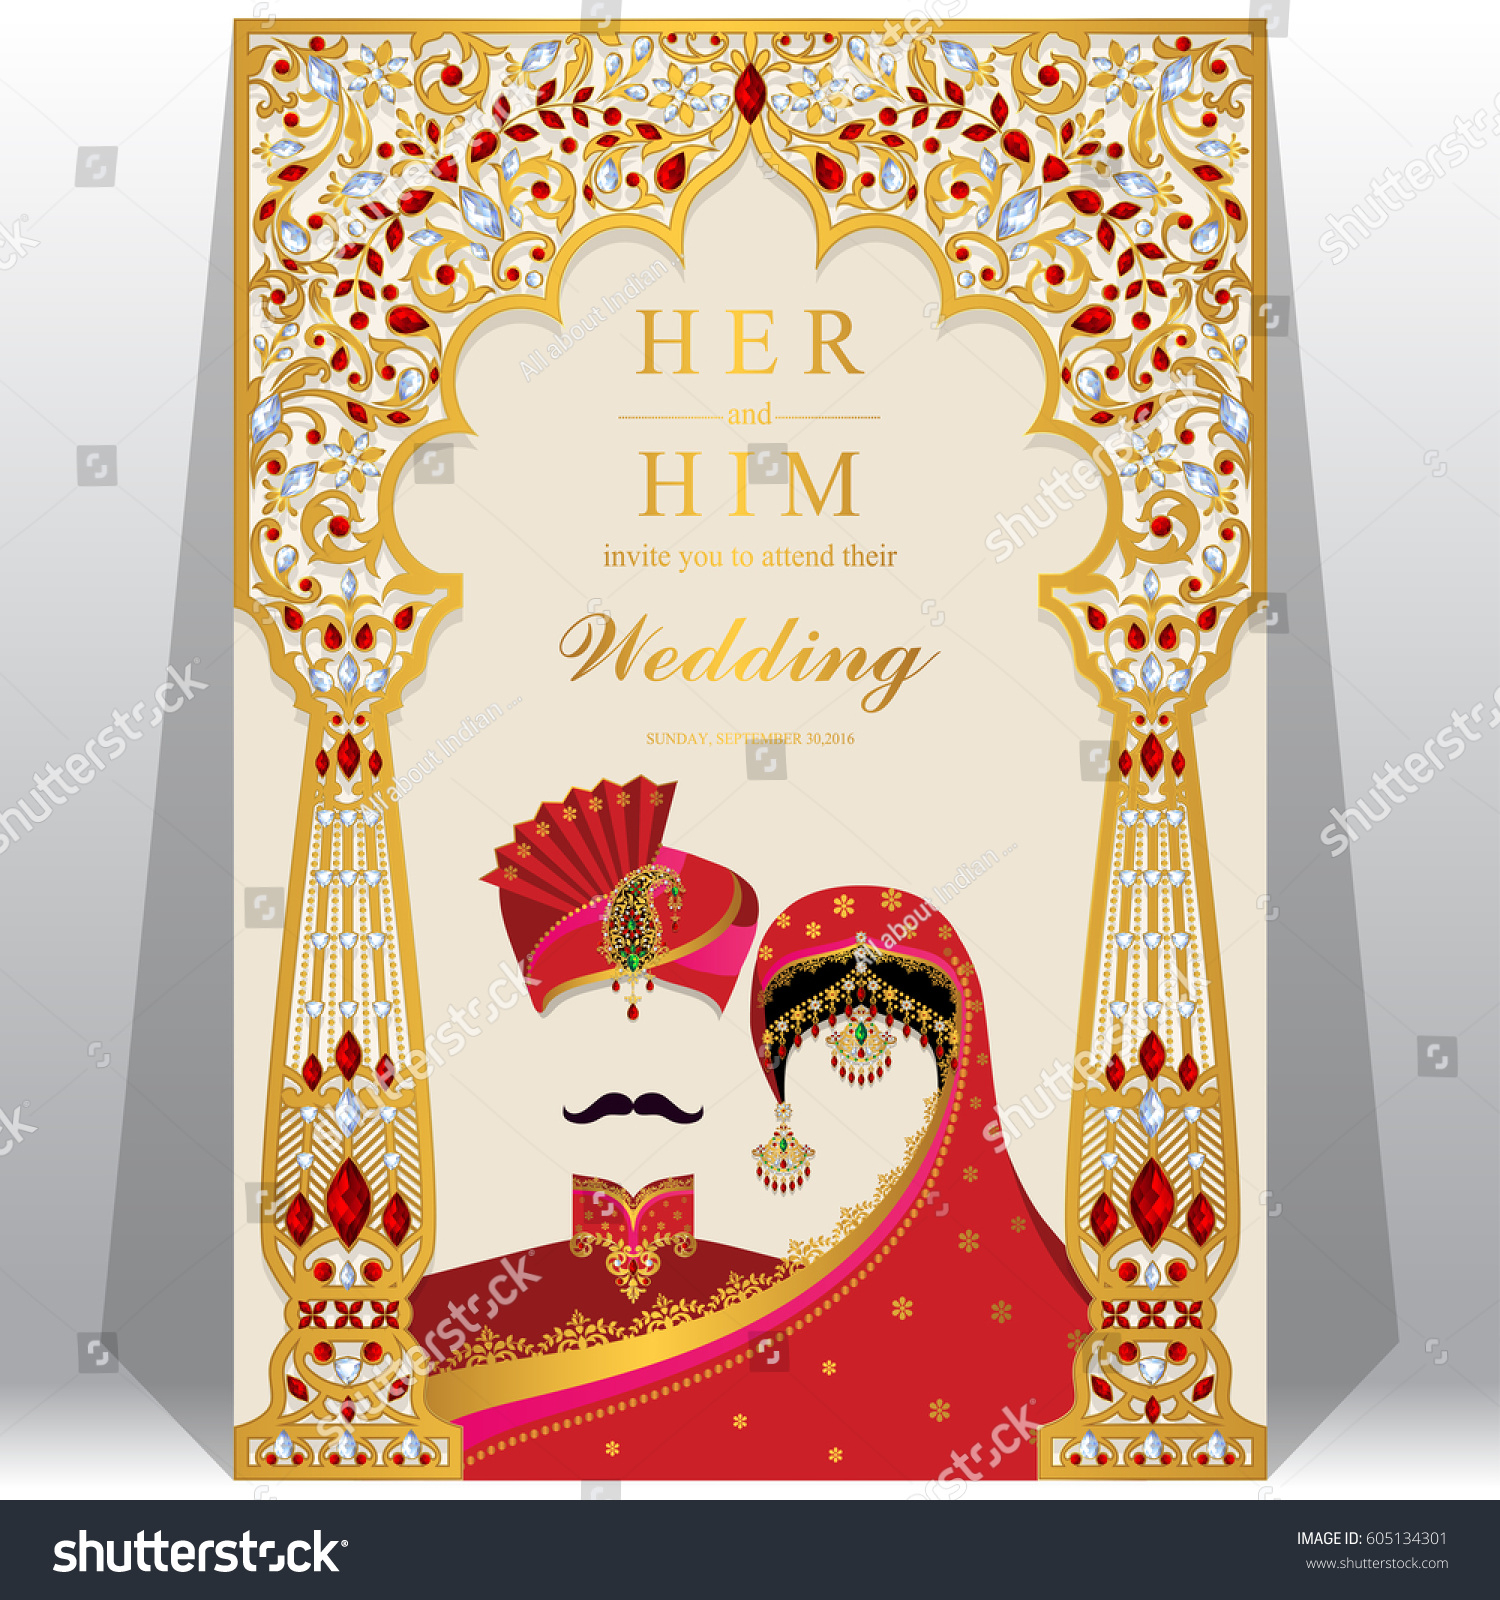 Indian Wedding Invitation Card Templates Gold Stock Vector Intended For Indian Wedding Cards Design Templates